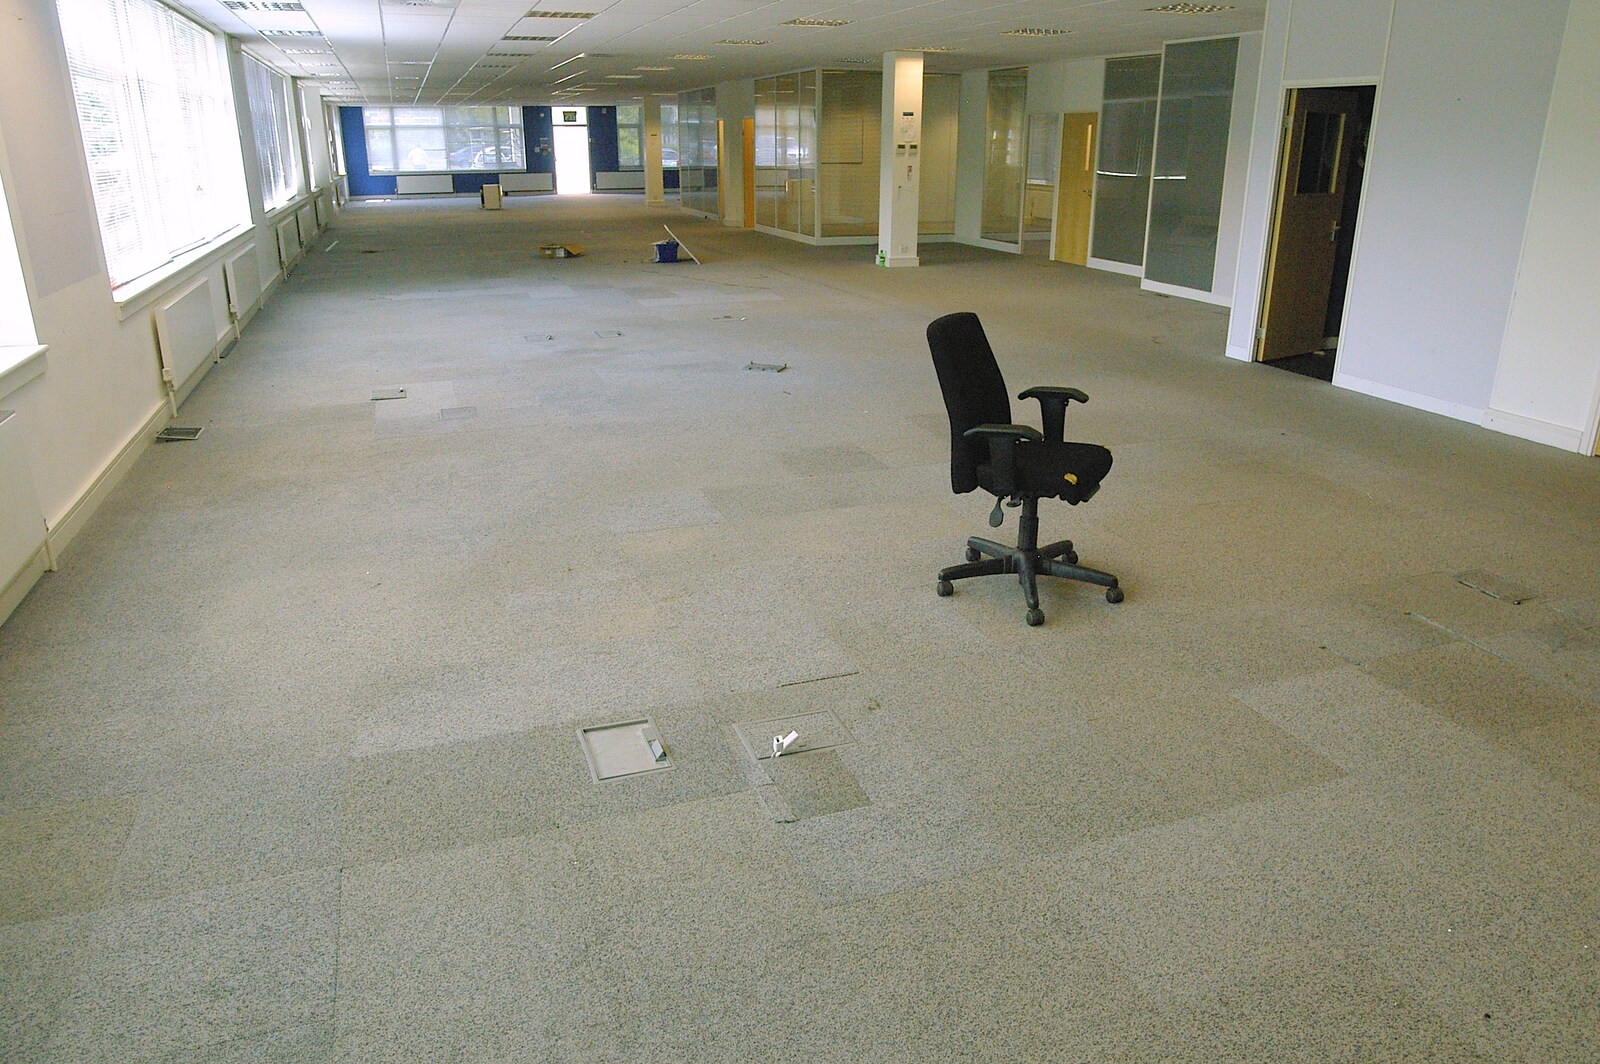 The almost-empty office from Qualcomm Moves Offices, Milton Road, Cambridge - 26th July 2006